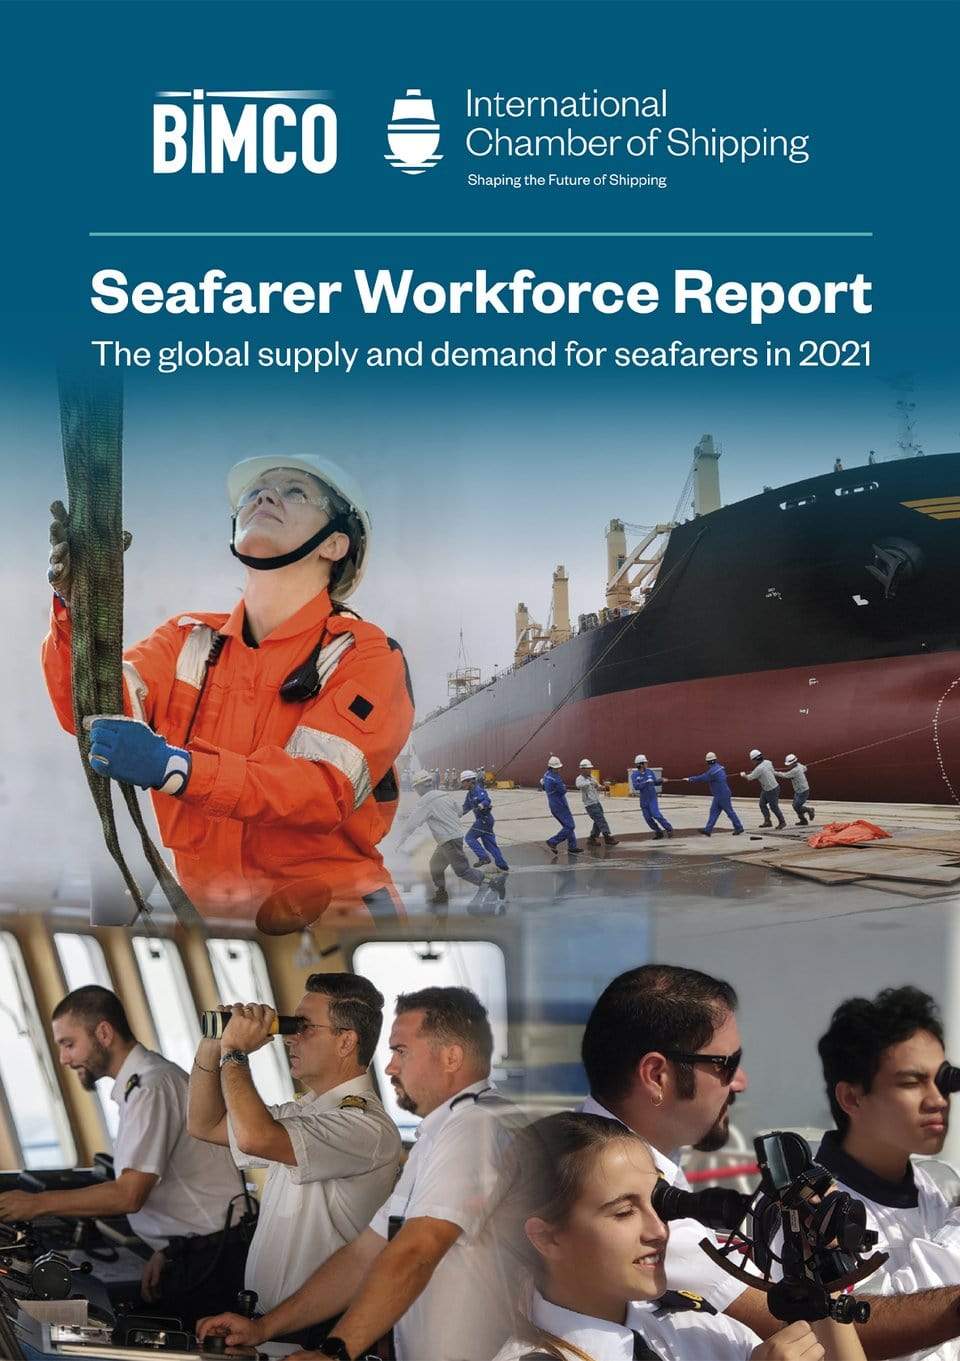 Seafarer Workforce Report - The Global Supply and Demand for Seafarers, 2021 Edition